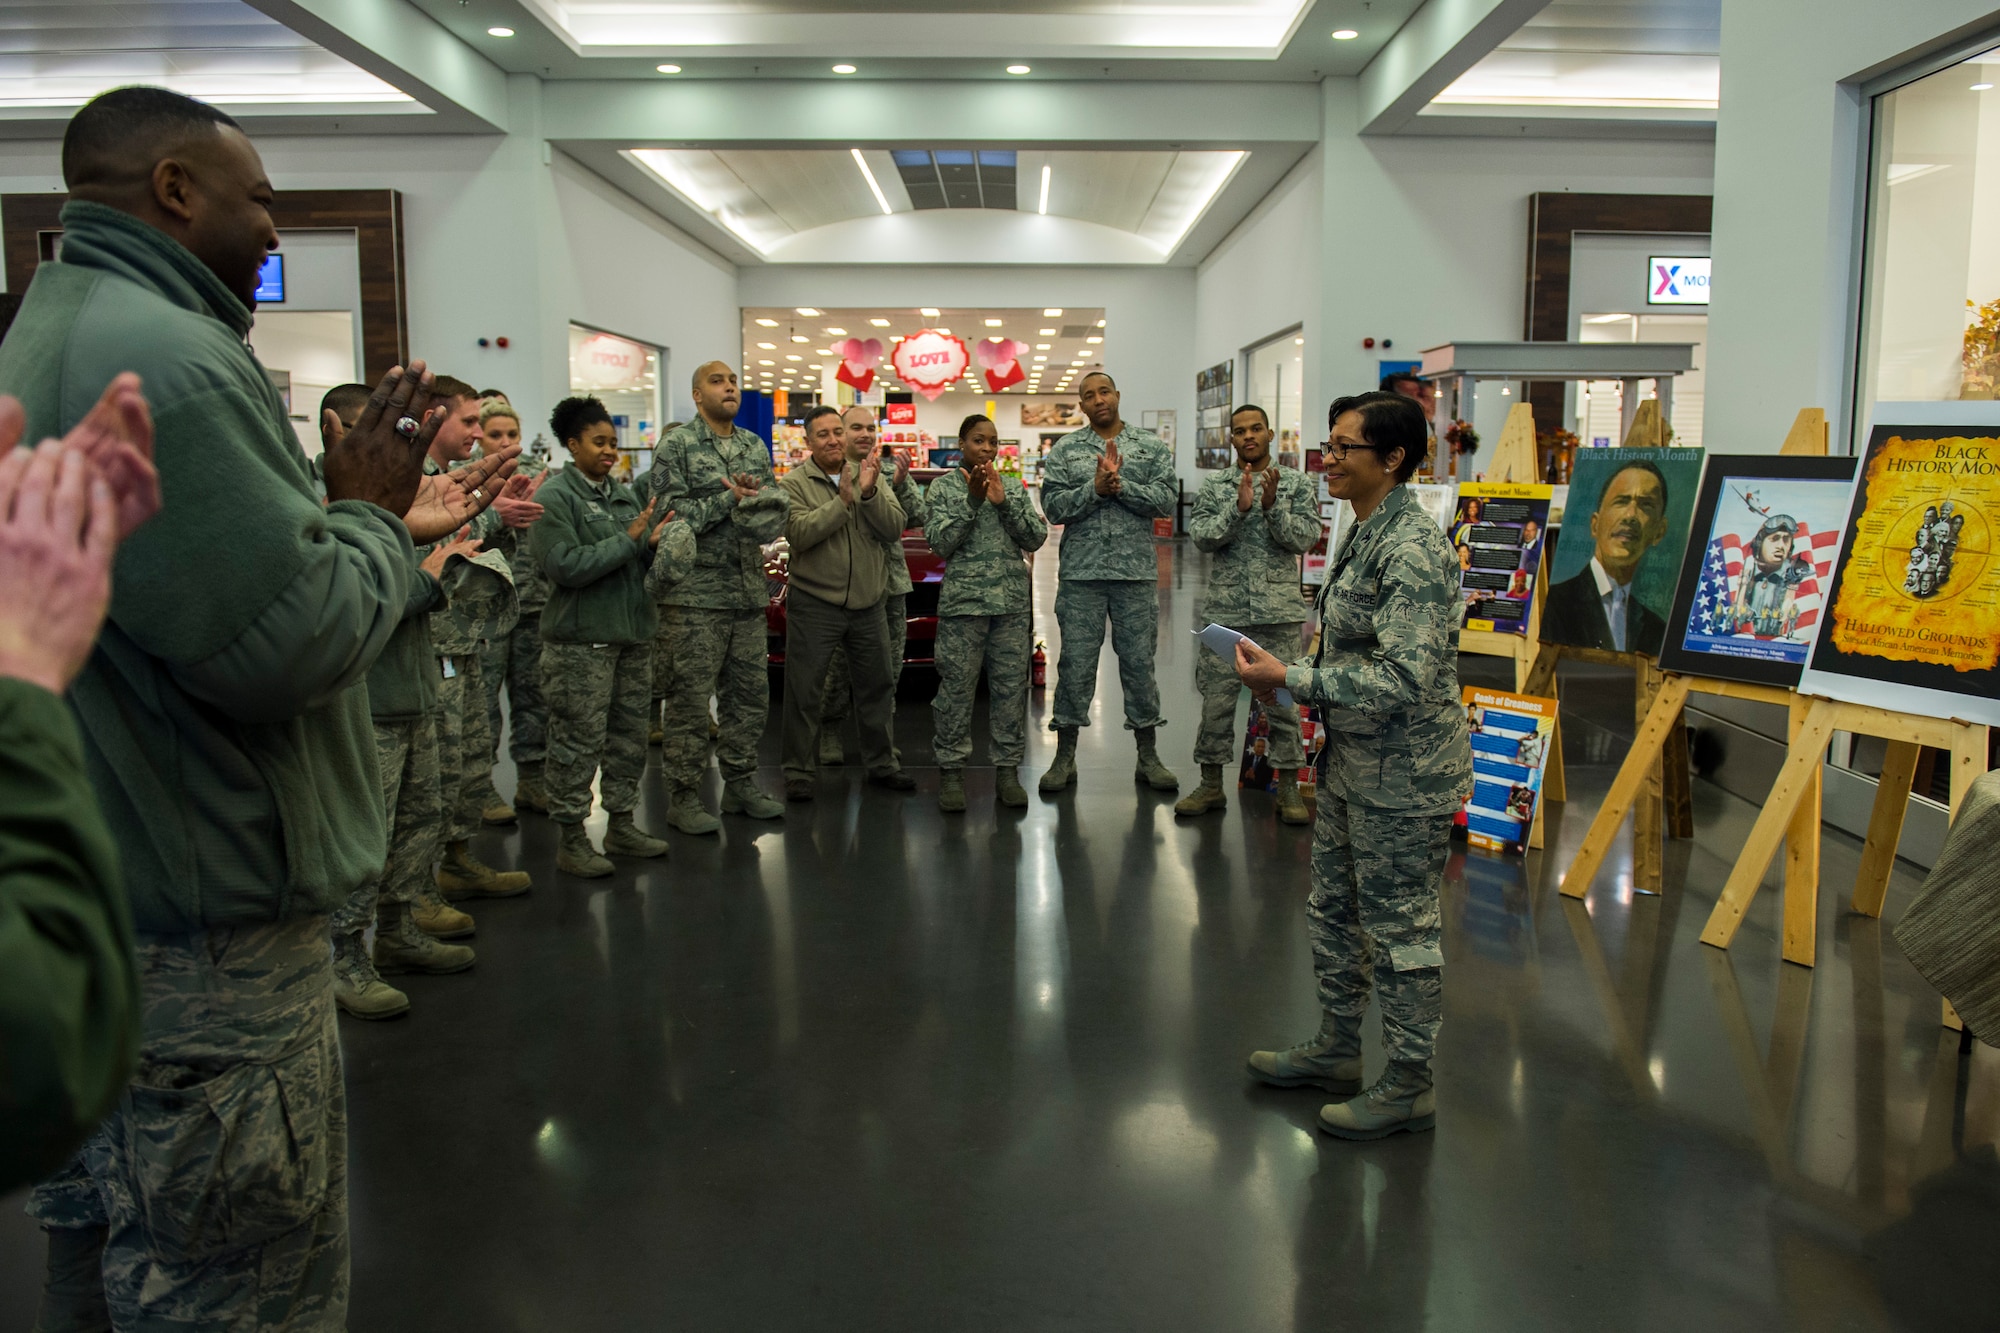 Airmen applause after U.S. Air Force Col. Patricia John, 52nd Medical Operations Squadron commander, gave her opening remarks for National African American History Month at The Exchange on Spangdahlem Air Base, Jan. 2, 2016. This is the 40th consecutive year that February has been NAAHM to remember the efforts and accomplishments of African Americans in the Unites States’ history. (U.S. Air Force photo by Airman 1st Class Luke Kitterman/Released)